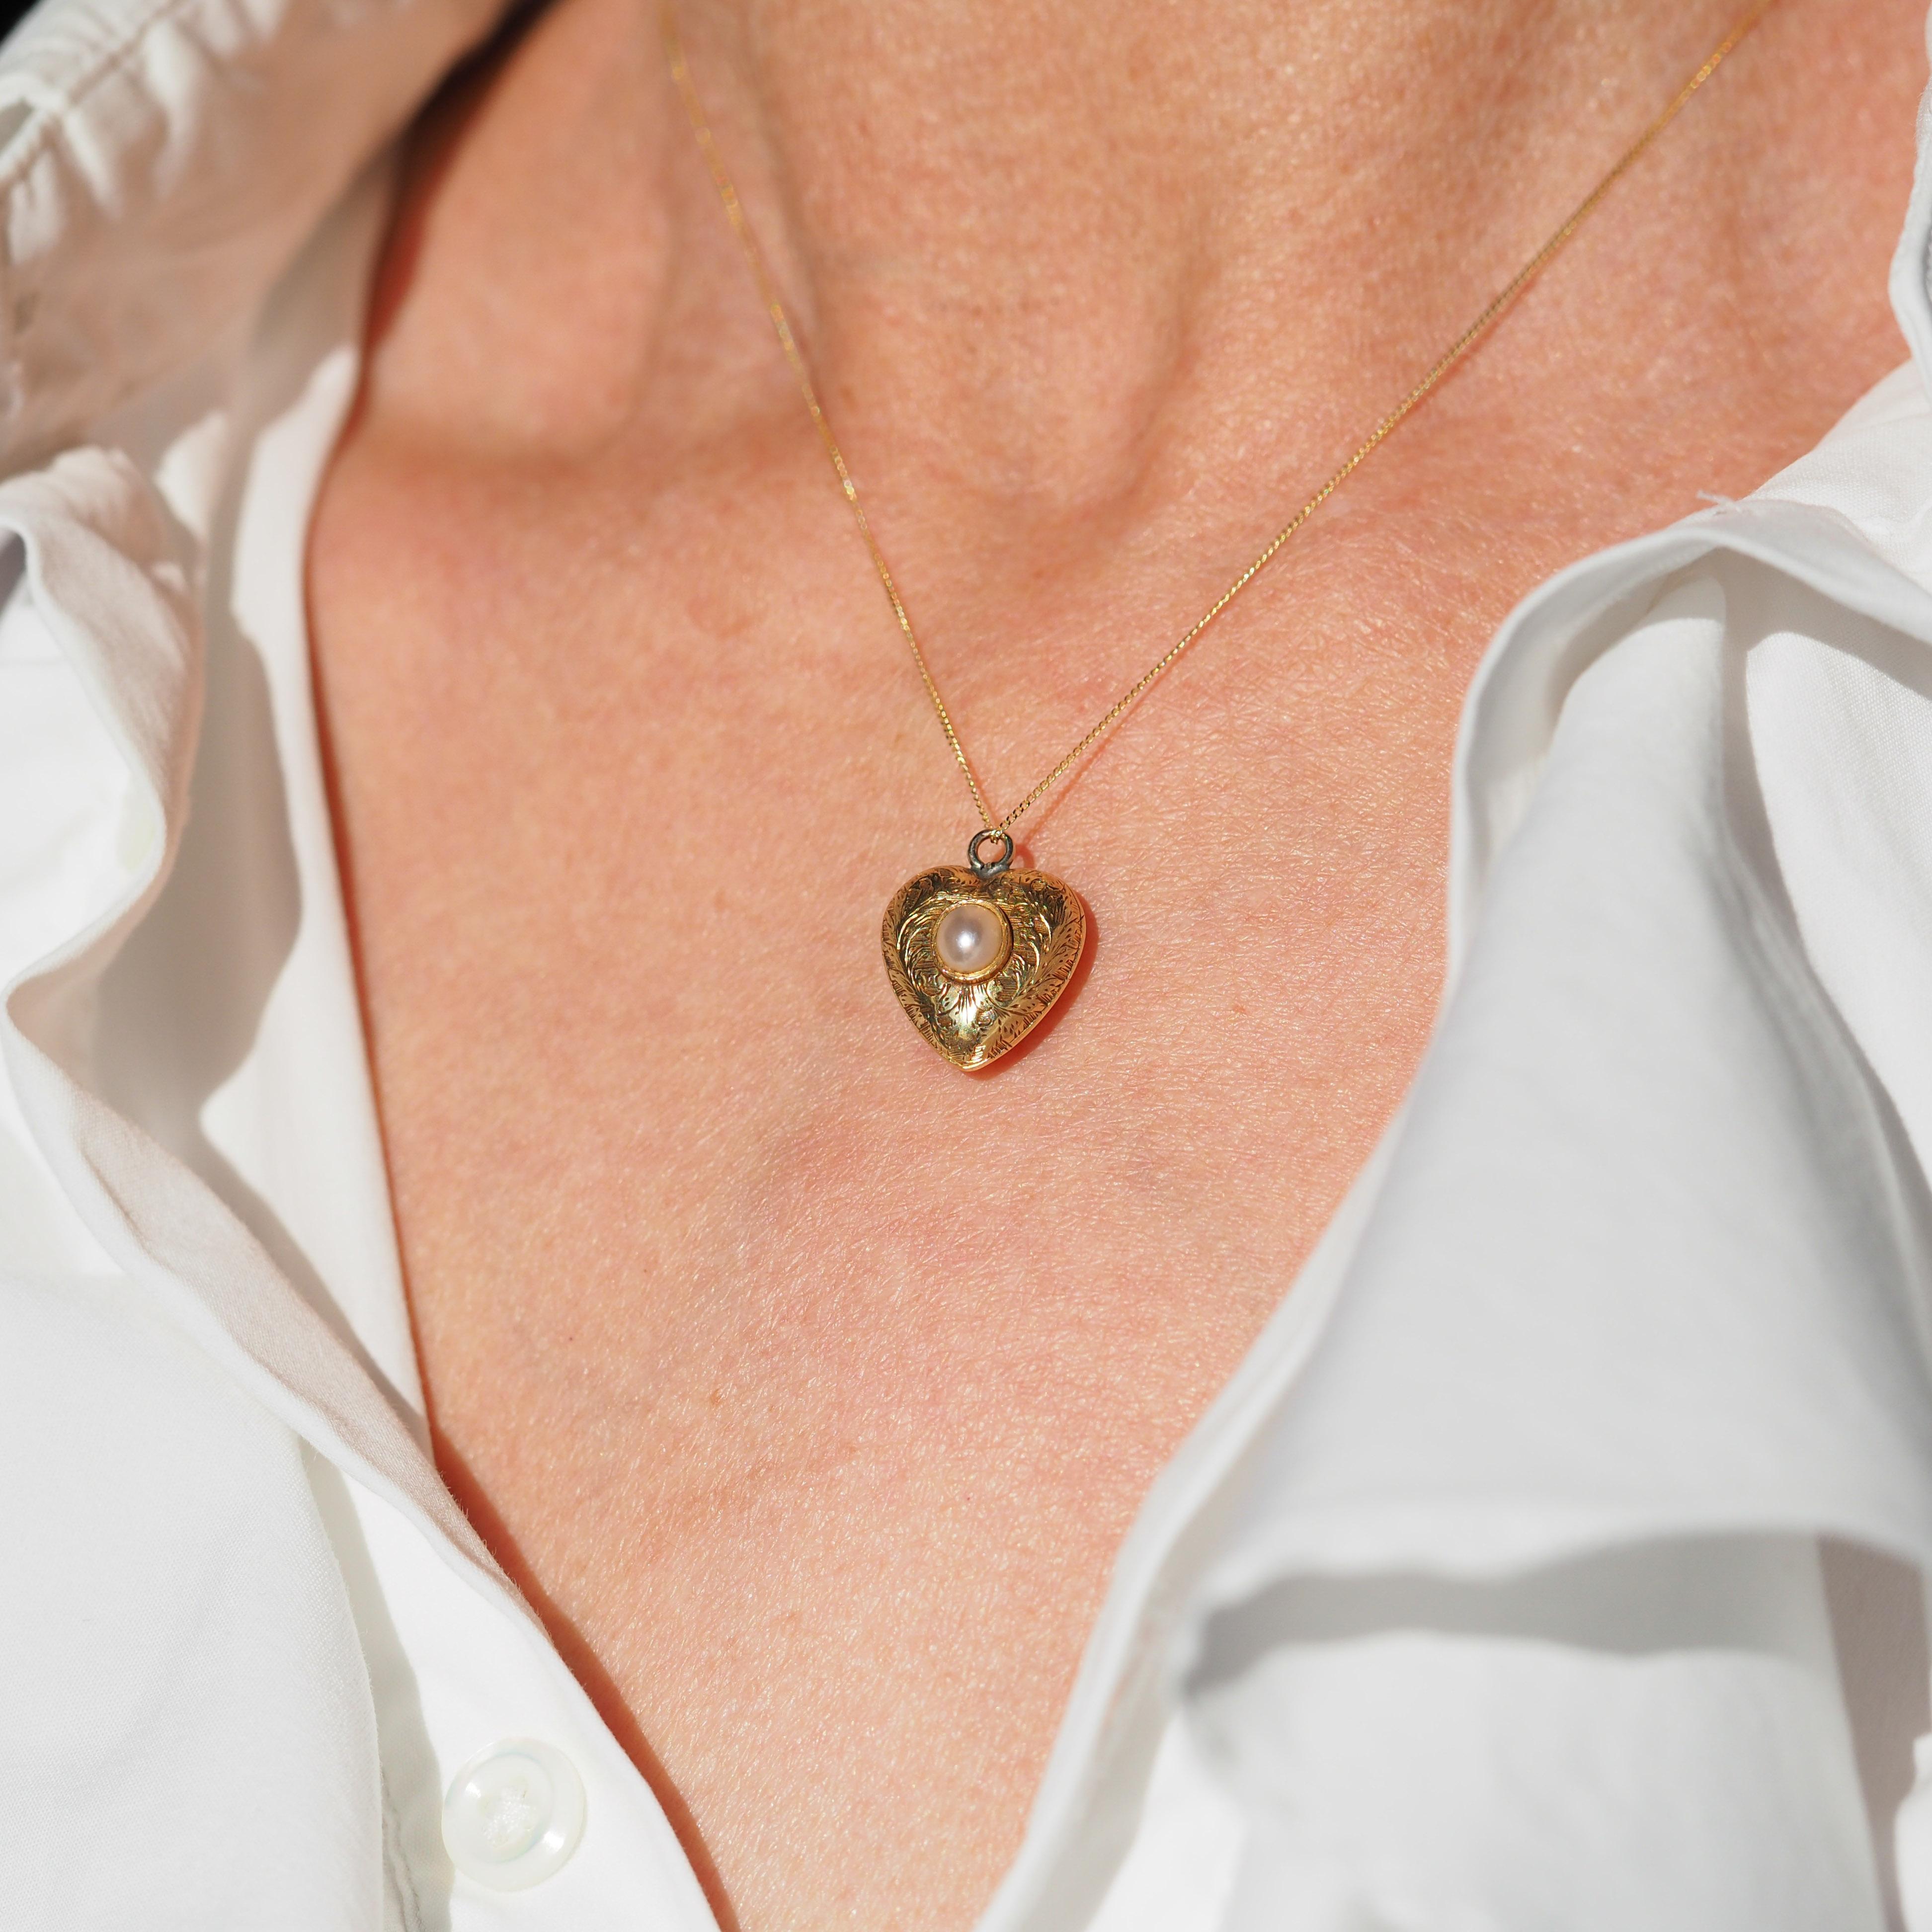 Antique 18K Gold Heart Charm Pendant Necklace with Pearl - Victorian c.1890 10